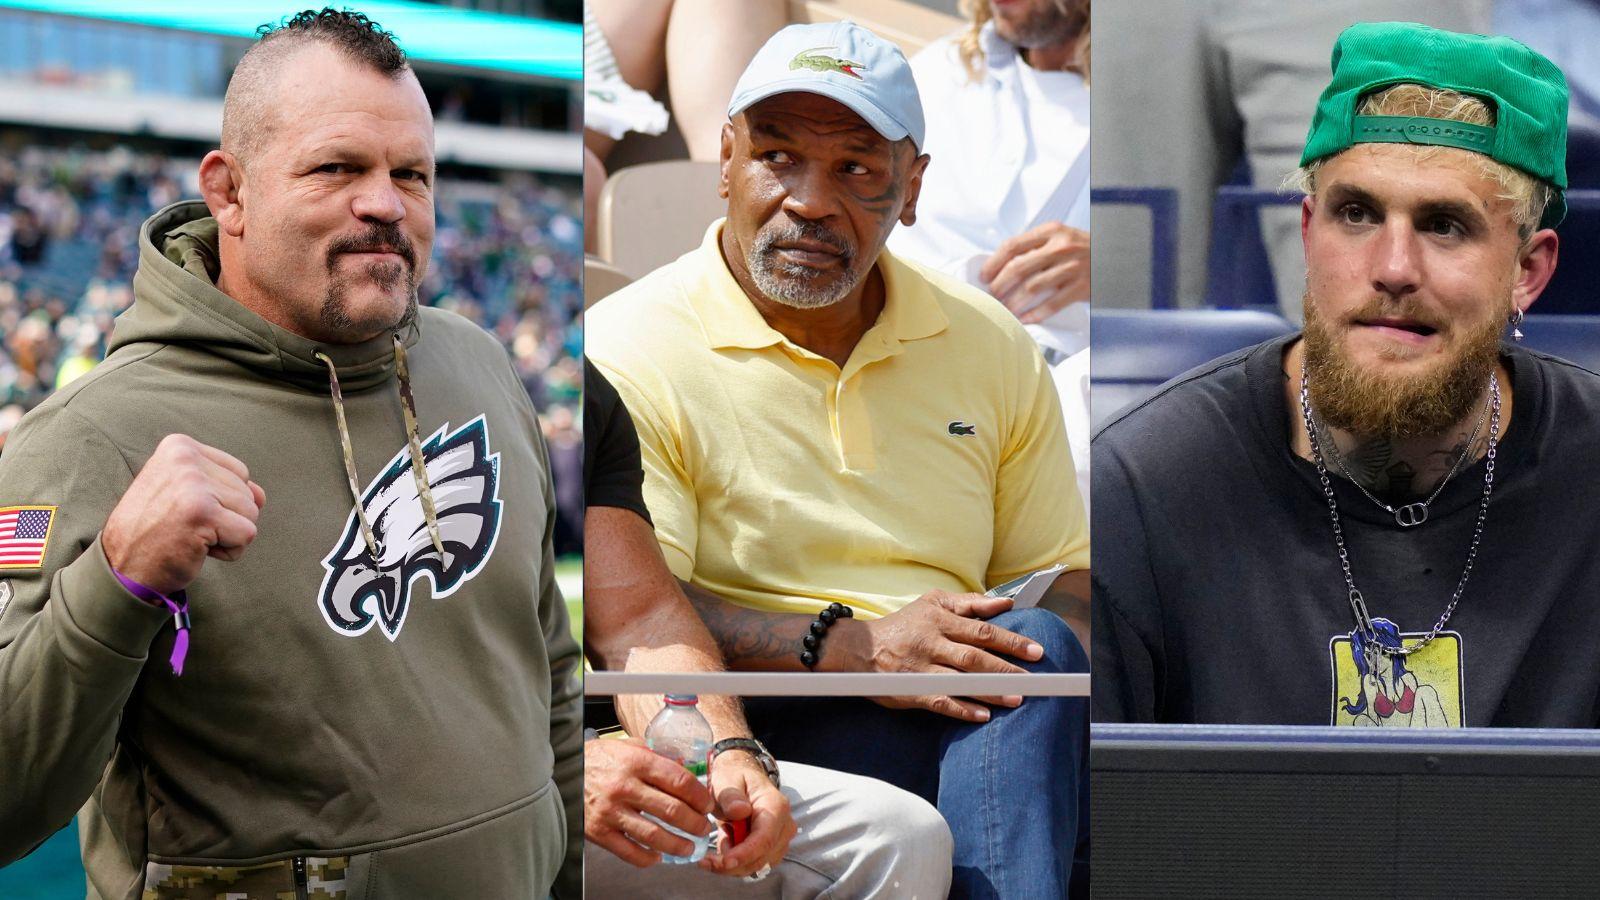 Chuck Liddell (left) and Mike Tyson (center) and Jake Paul (right) all at different sporting events in streetclothes.